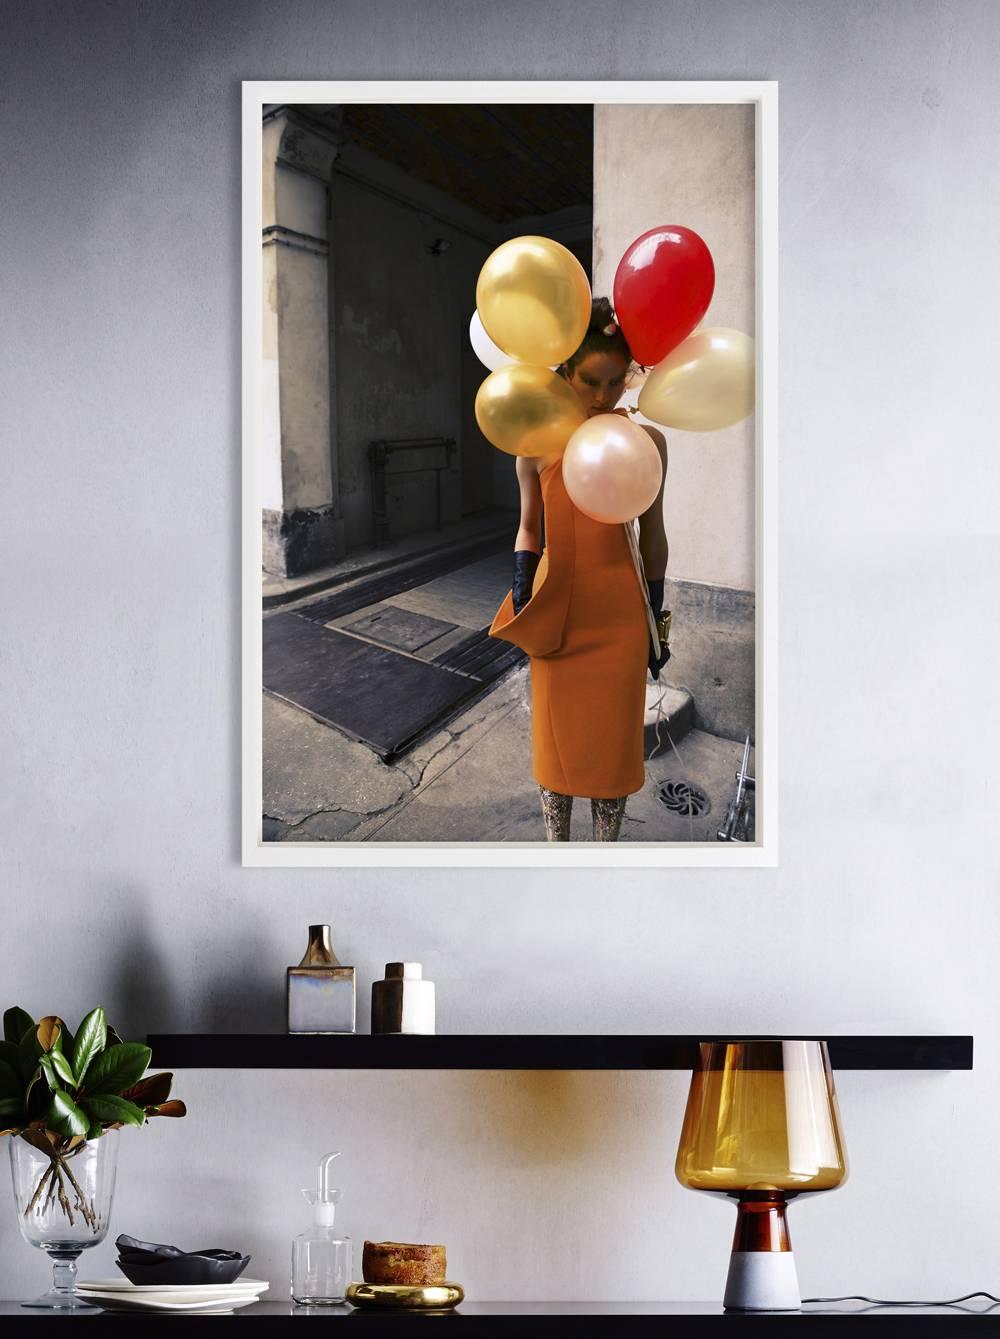 Fashion Model (Balloons) - Photograph by Claudia Knoepfel & Stefan Indlekofer